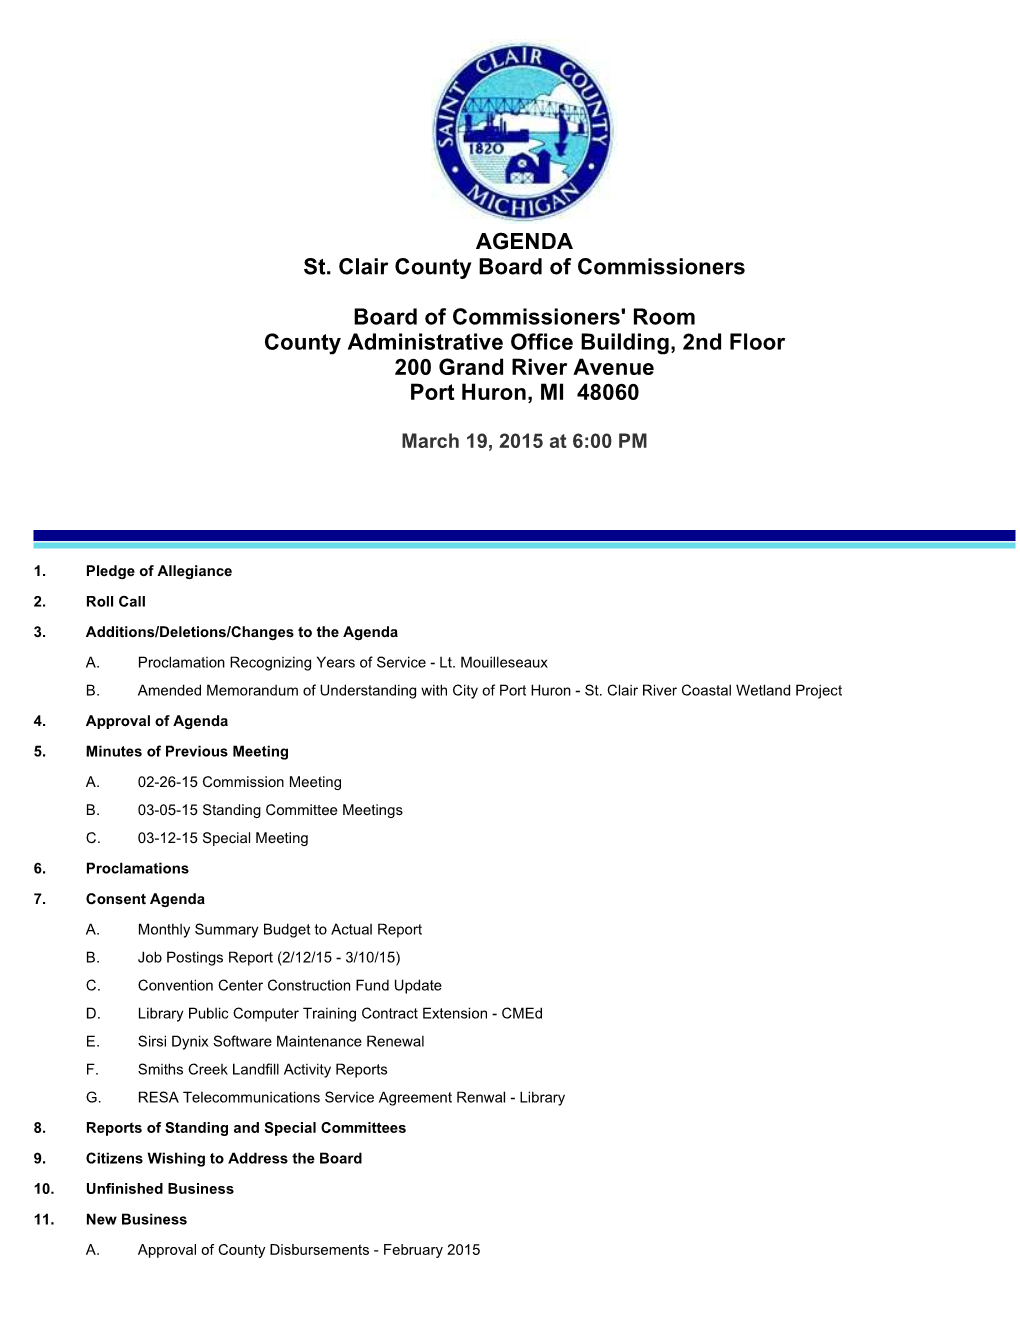 AGENDA St. Clair County Board of Commissioners Board Of